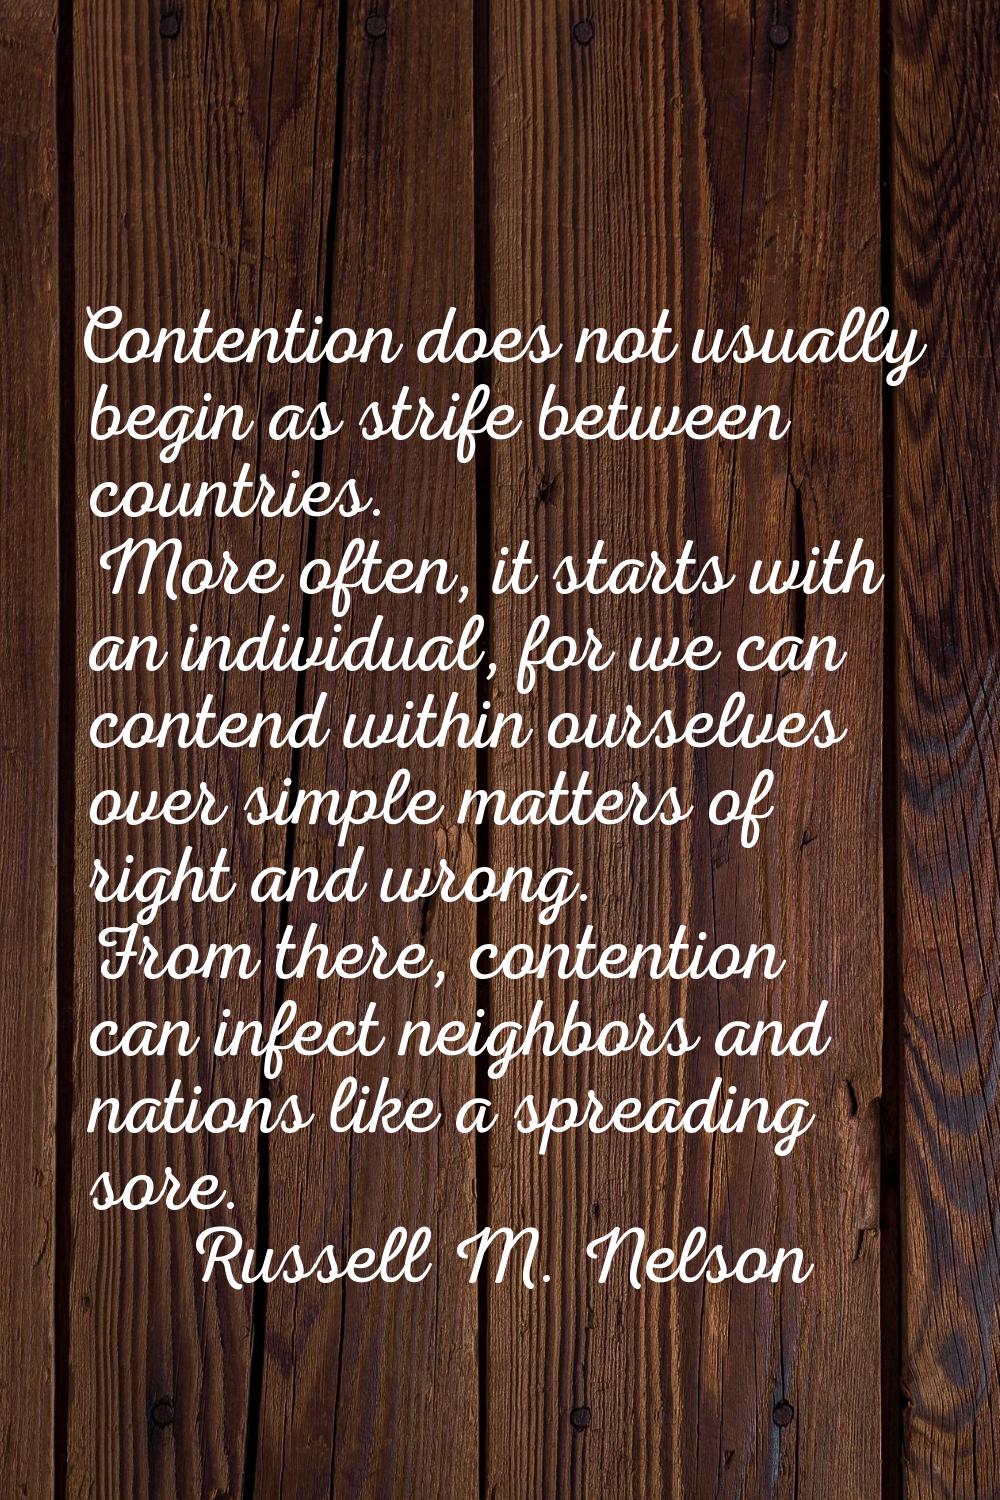 Contention does not usually begin as strife between countries. More often, it starts with an indivi